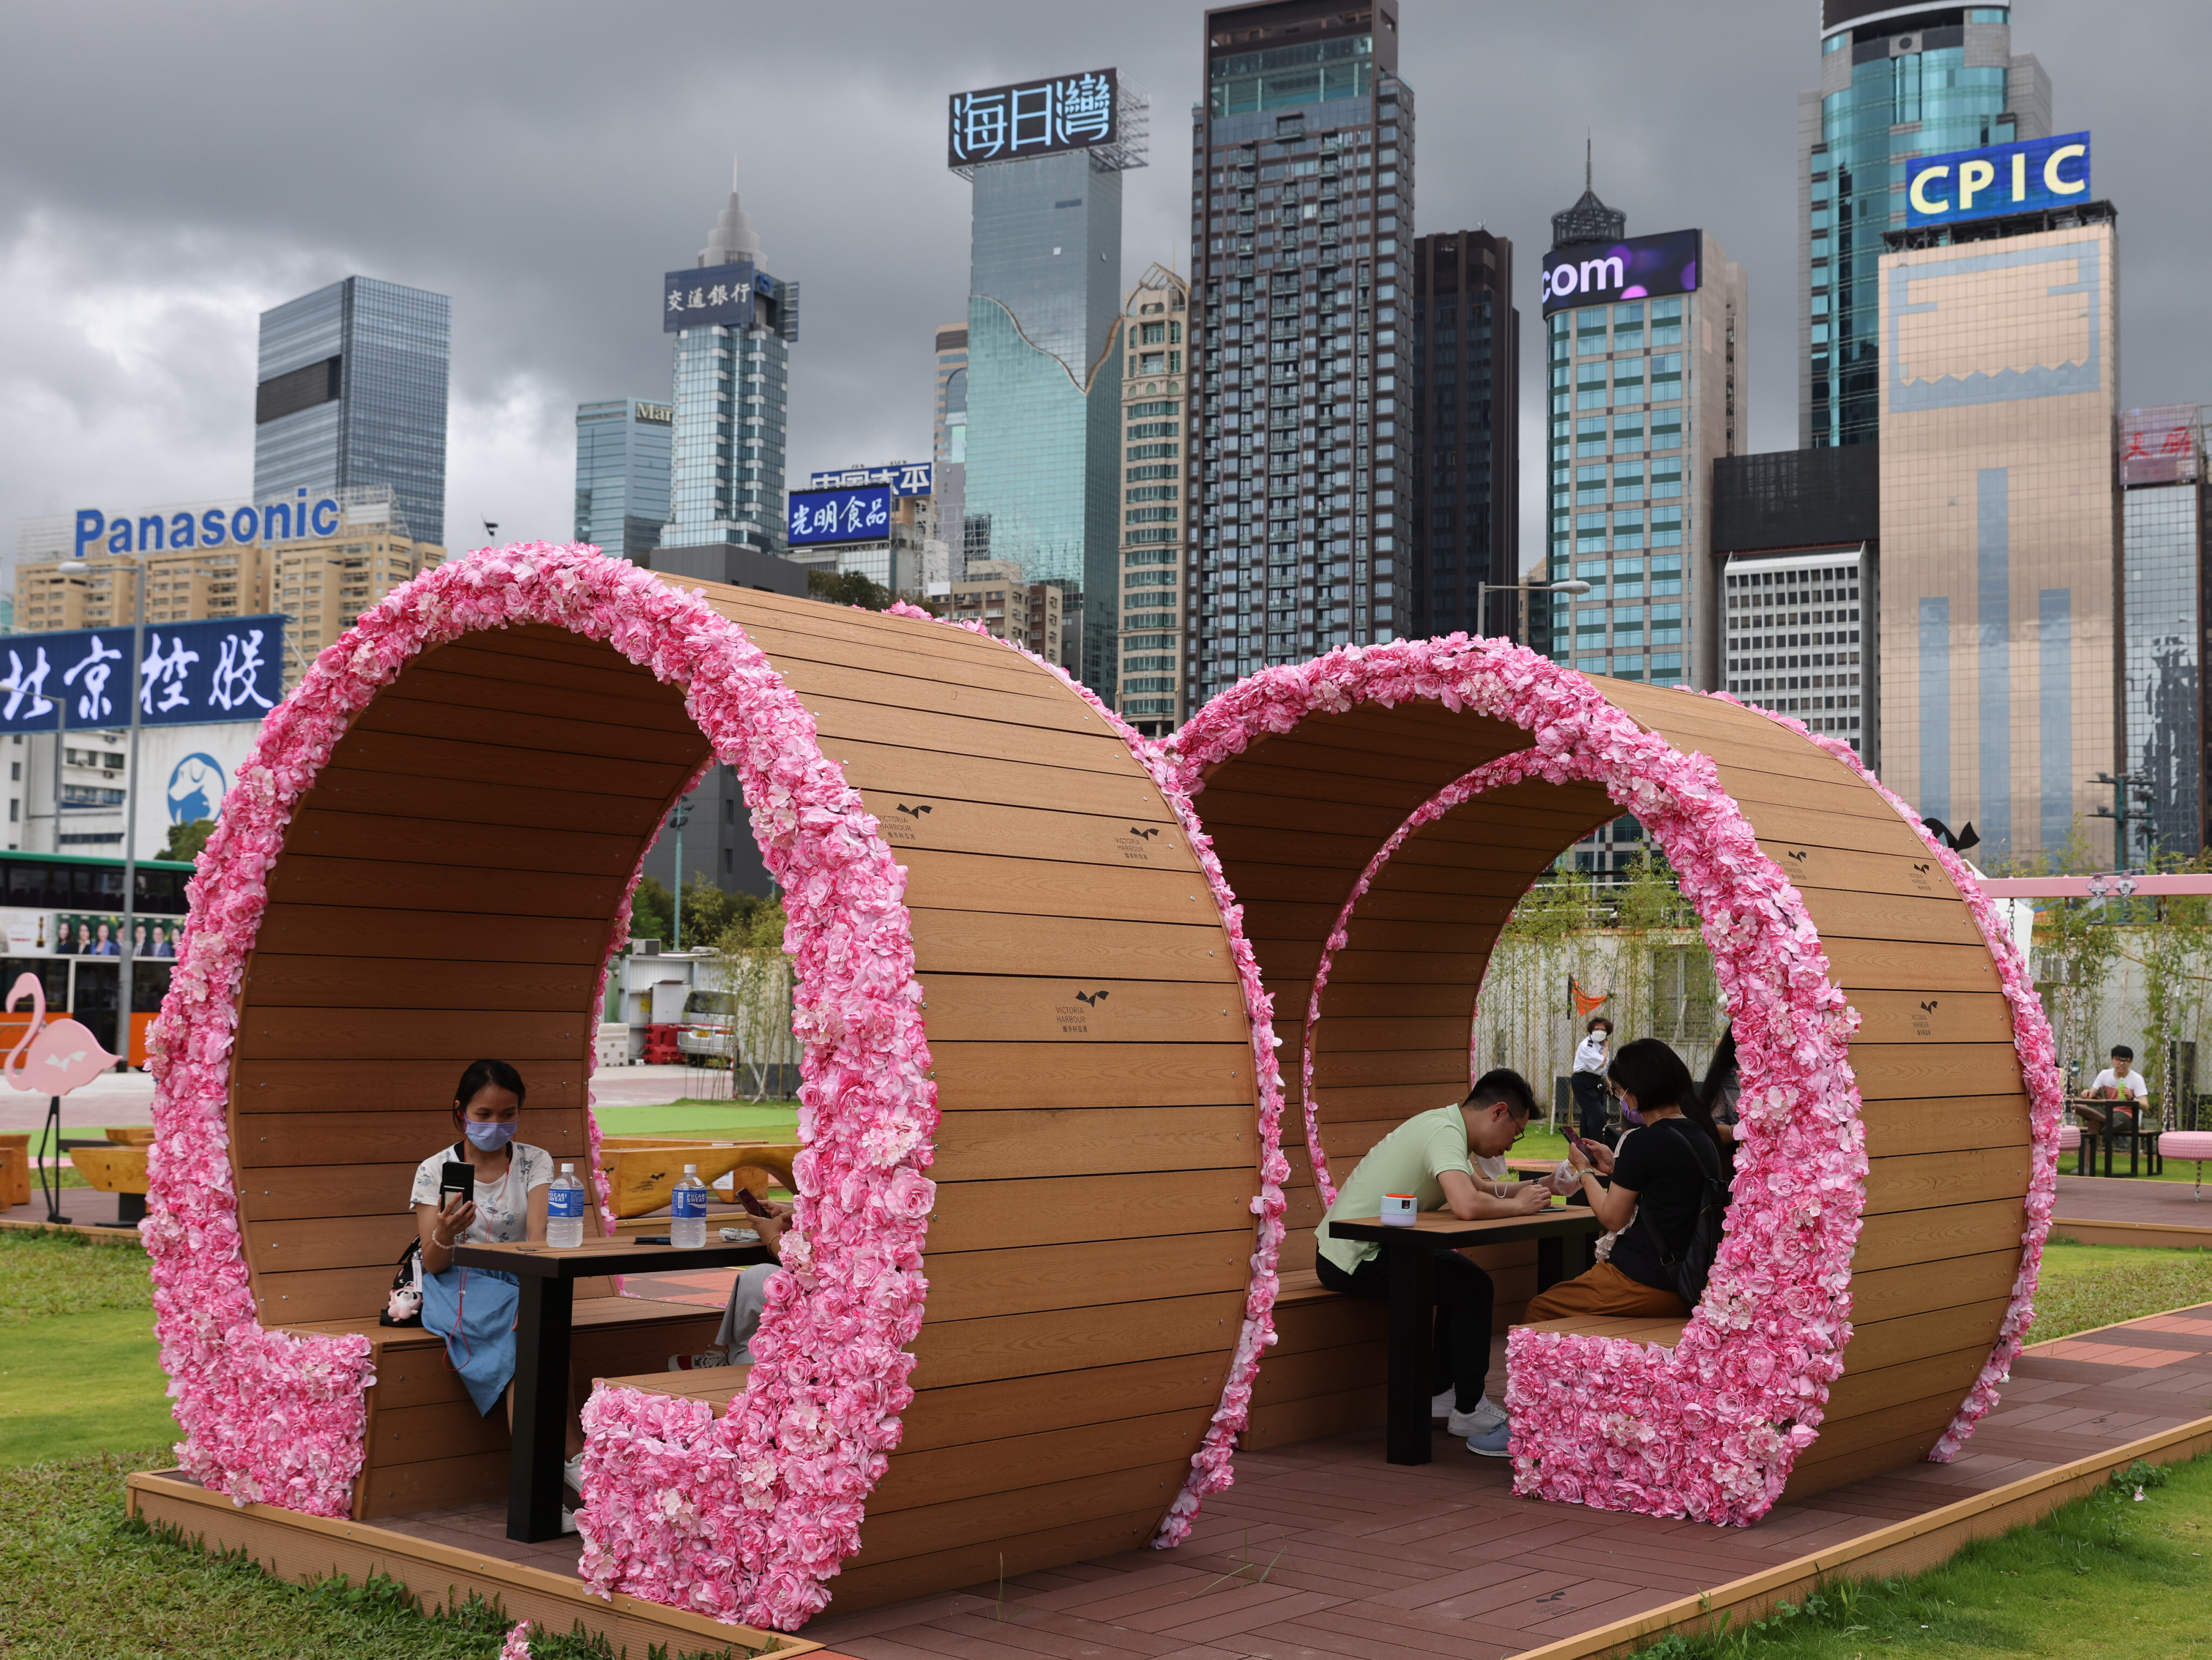 Visitors enjoy the pop-up initiative HarbourChill, where shelters, chairs and swings were set up for enjoyment next to the Pierside Precinct of Wan Chai Ferry Pier on May 29. Photo: Nora Tam